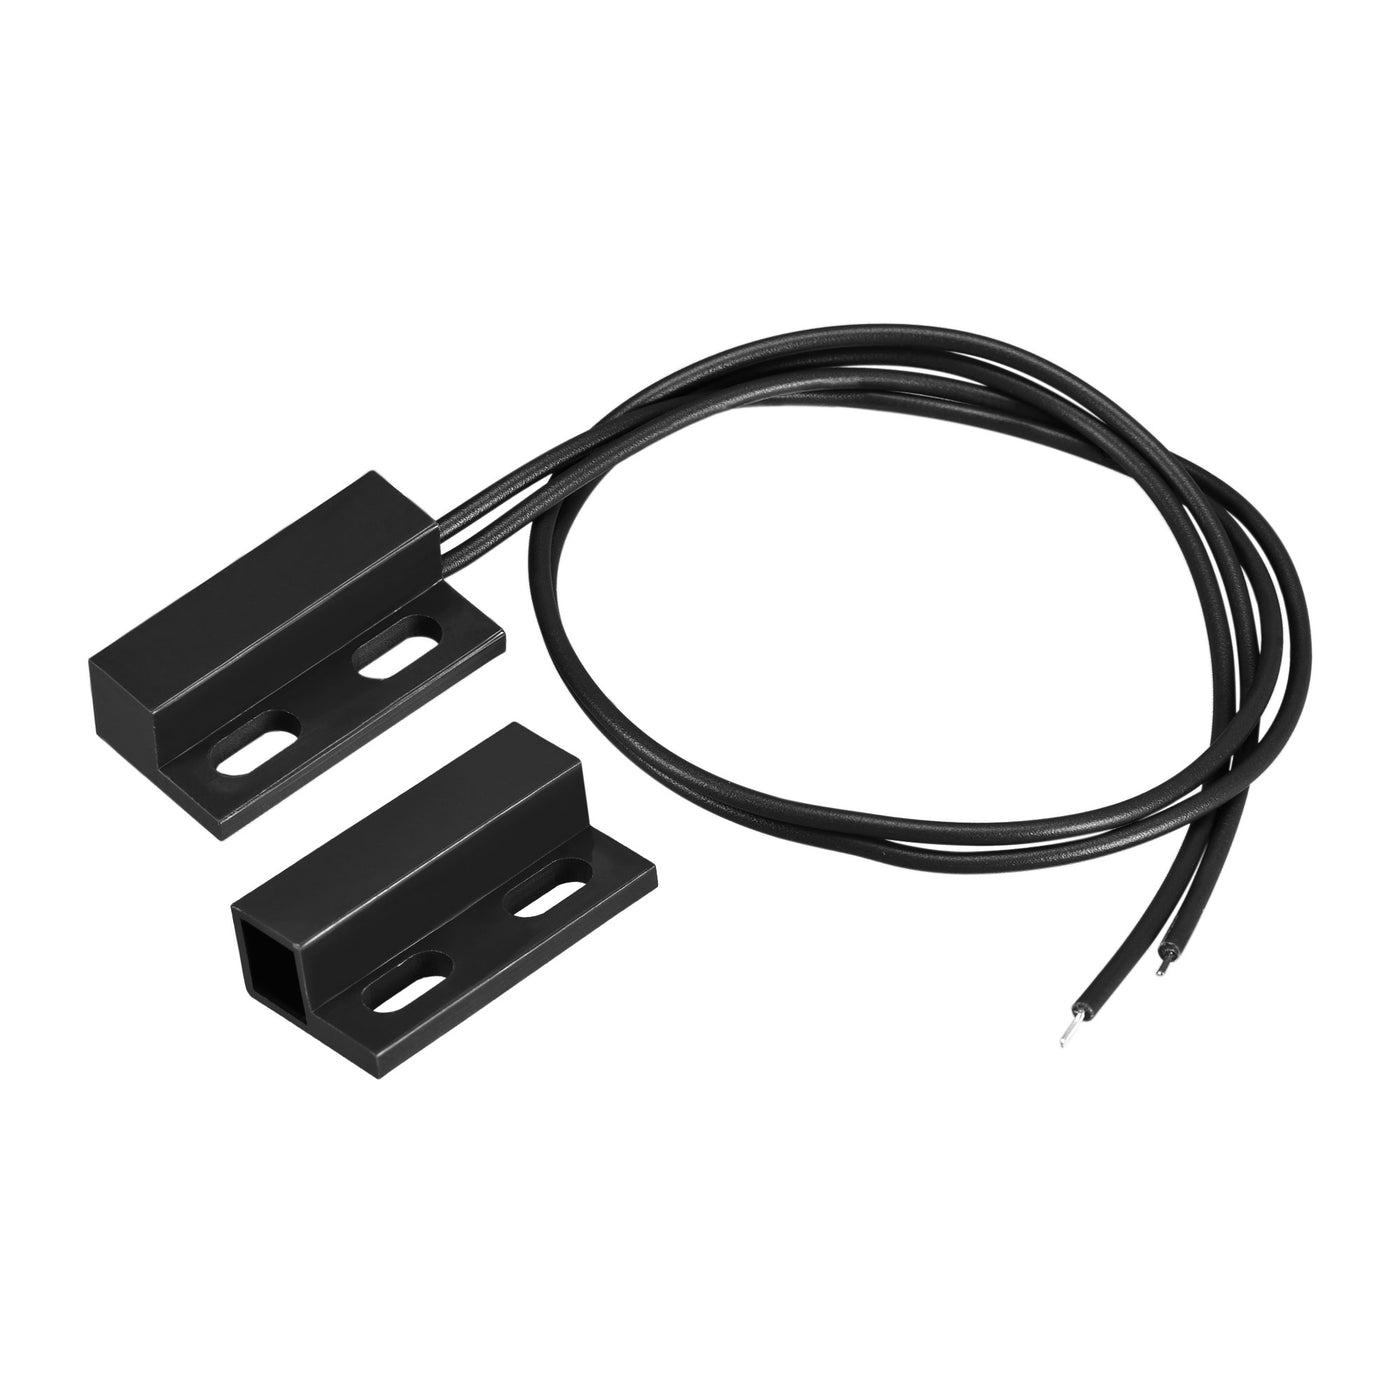 uxcell Uxcell Wired Door Contact Sensor NC Surface Mount Magnetic Reed Switch Black